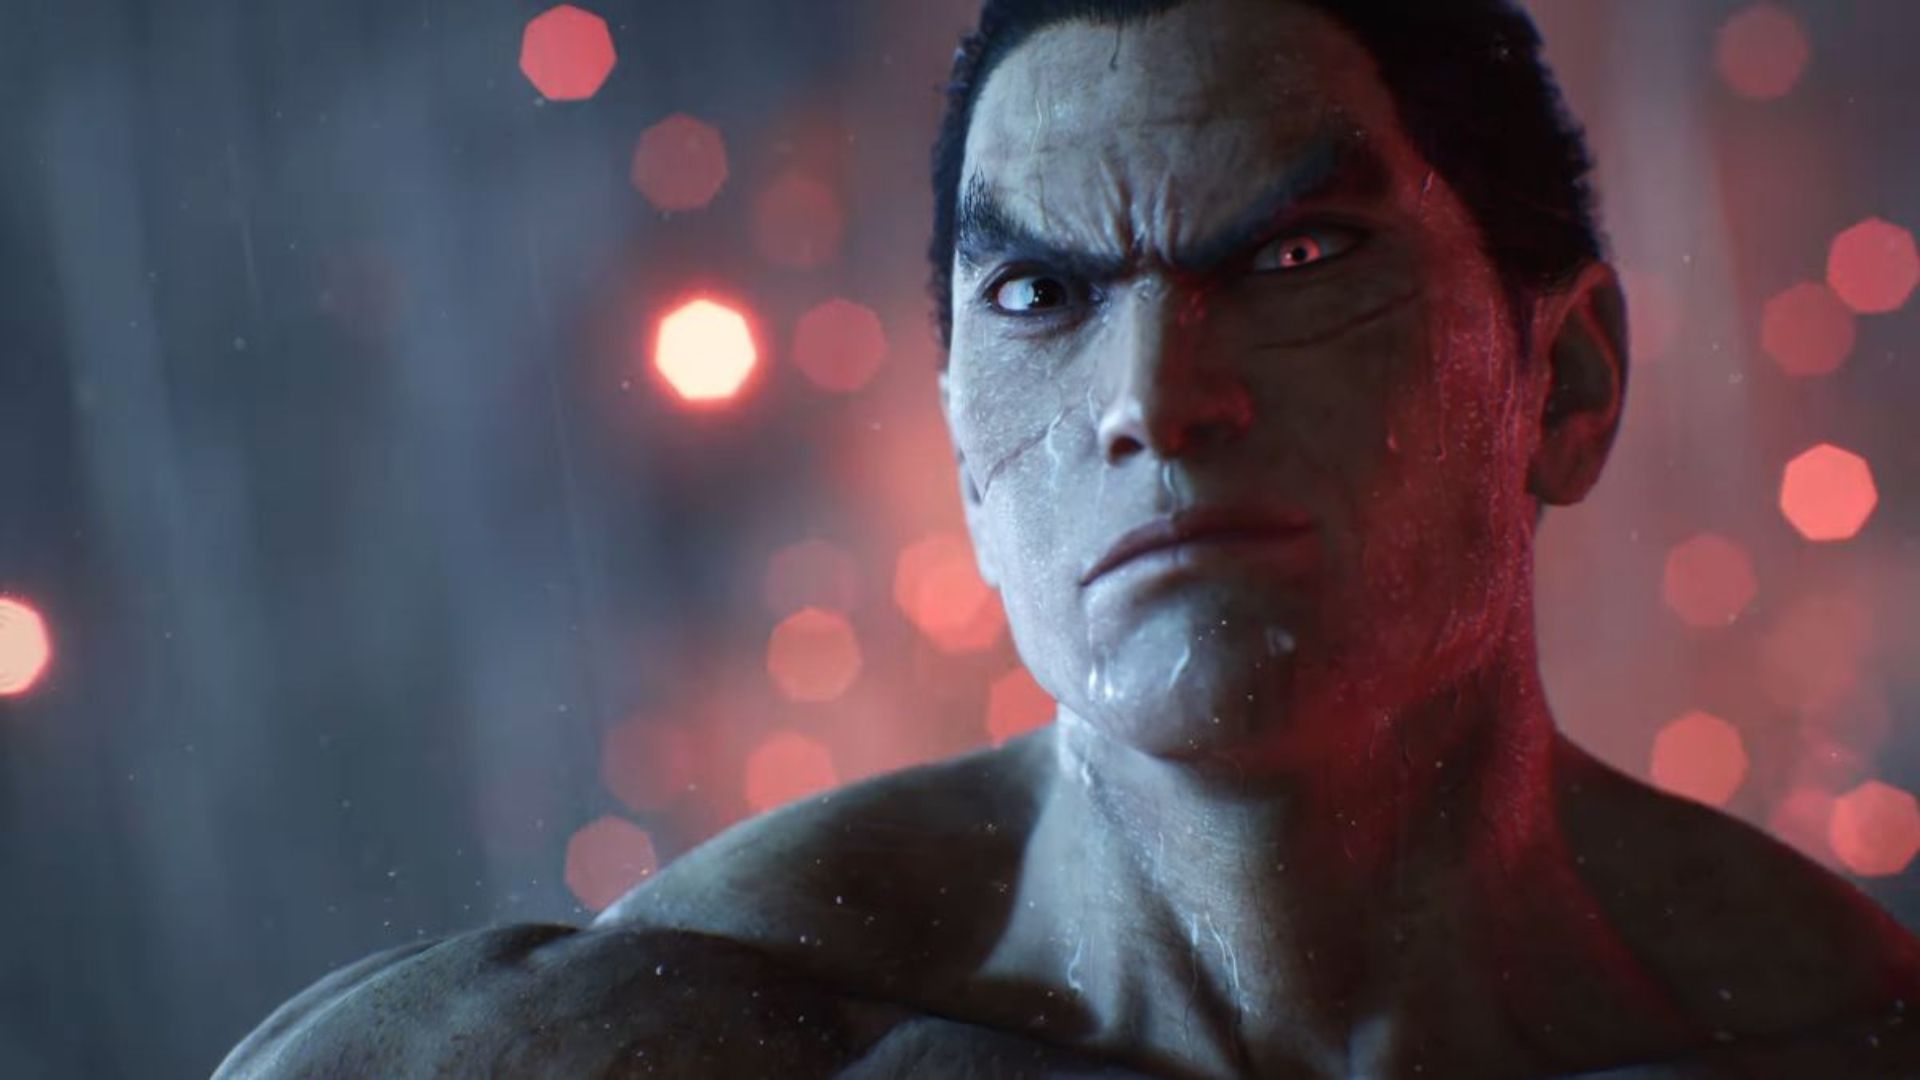 You can play Tekken 8 next month if you register now for the closed beta